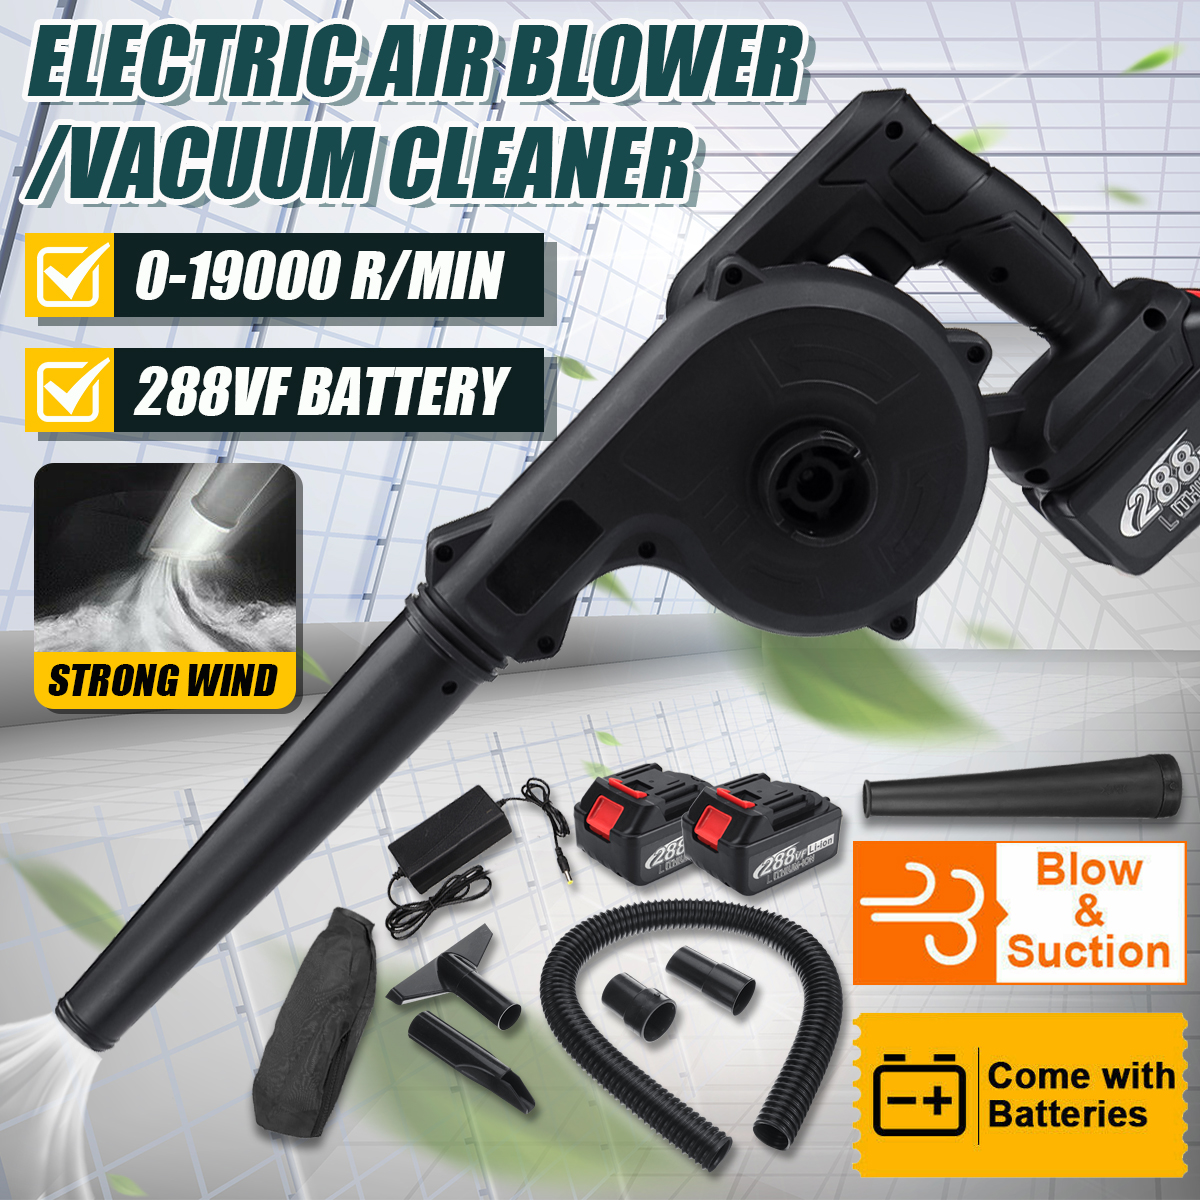 2-IN-1-18V-Cordless-Electric-Air-Blower--Suction-Handheld-Leaf-Computer-Dust-Collector-Cleaner-W-Non-1855962-1